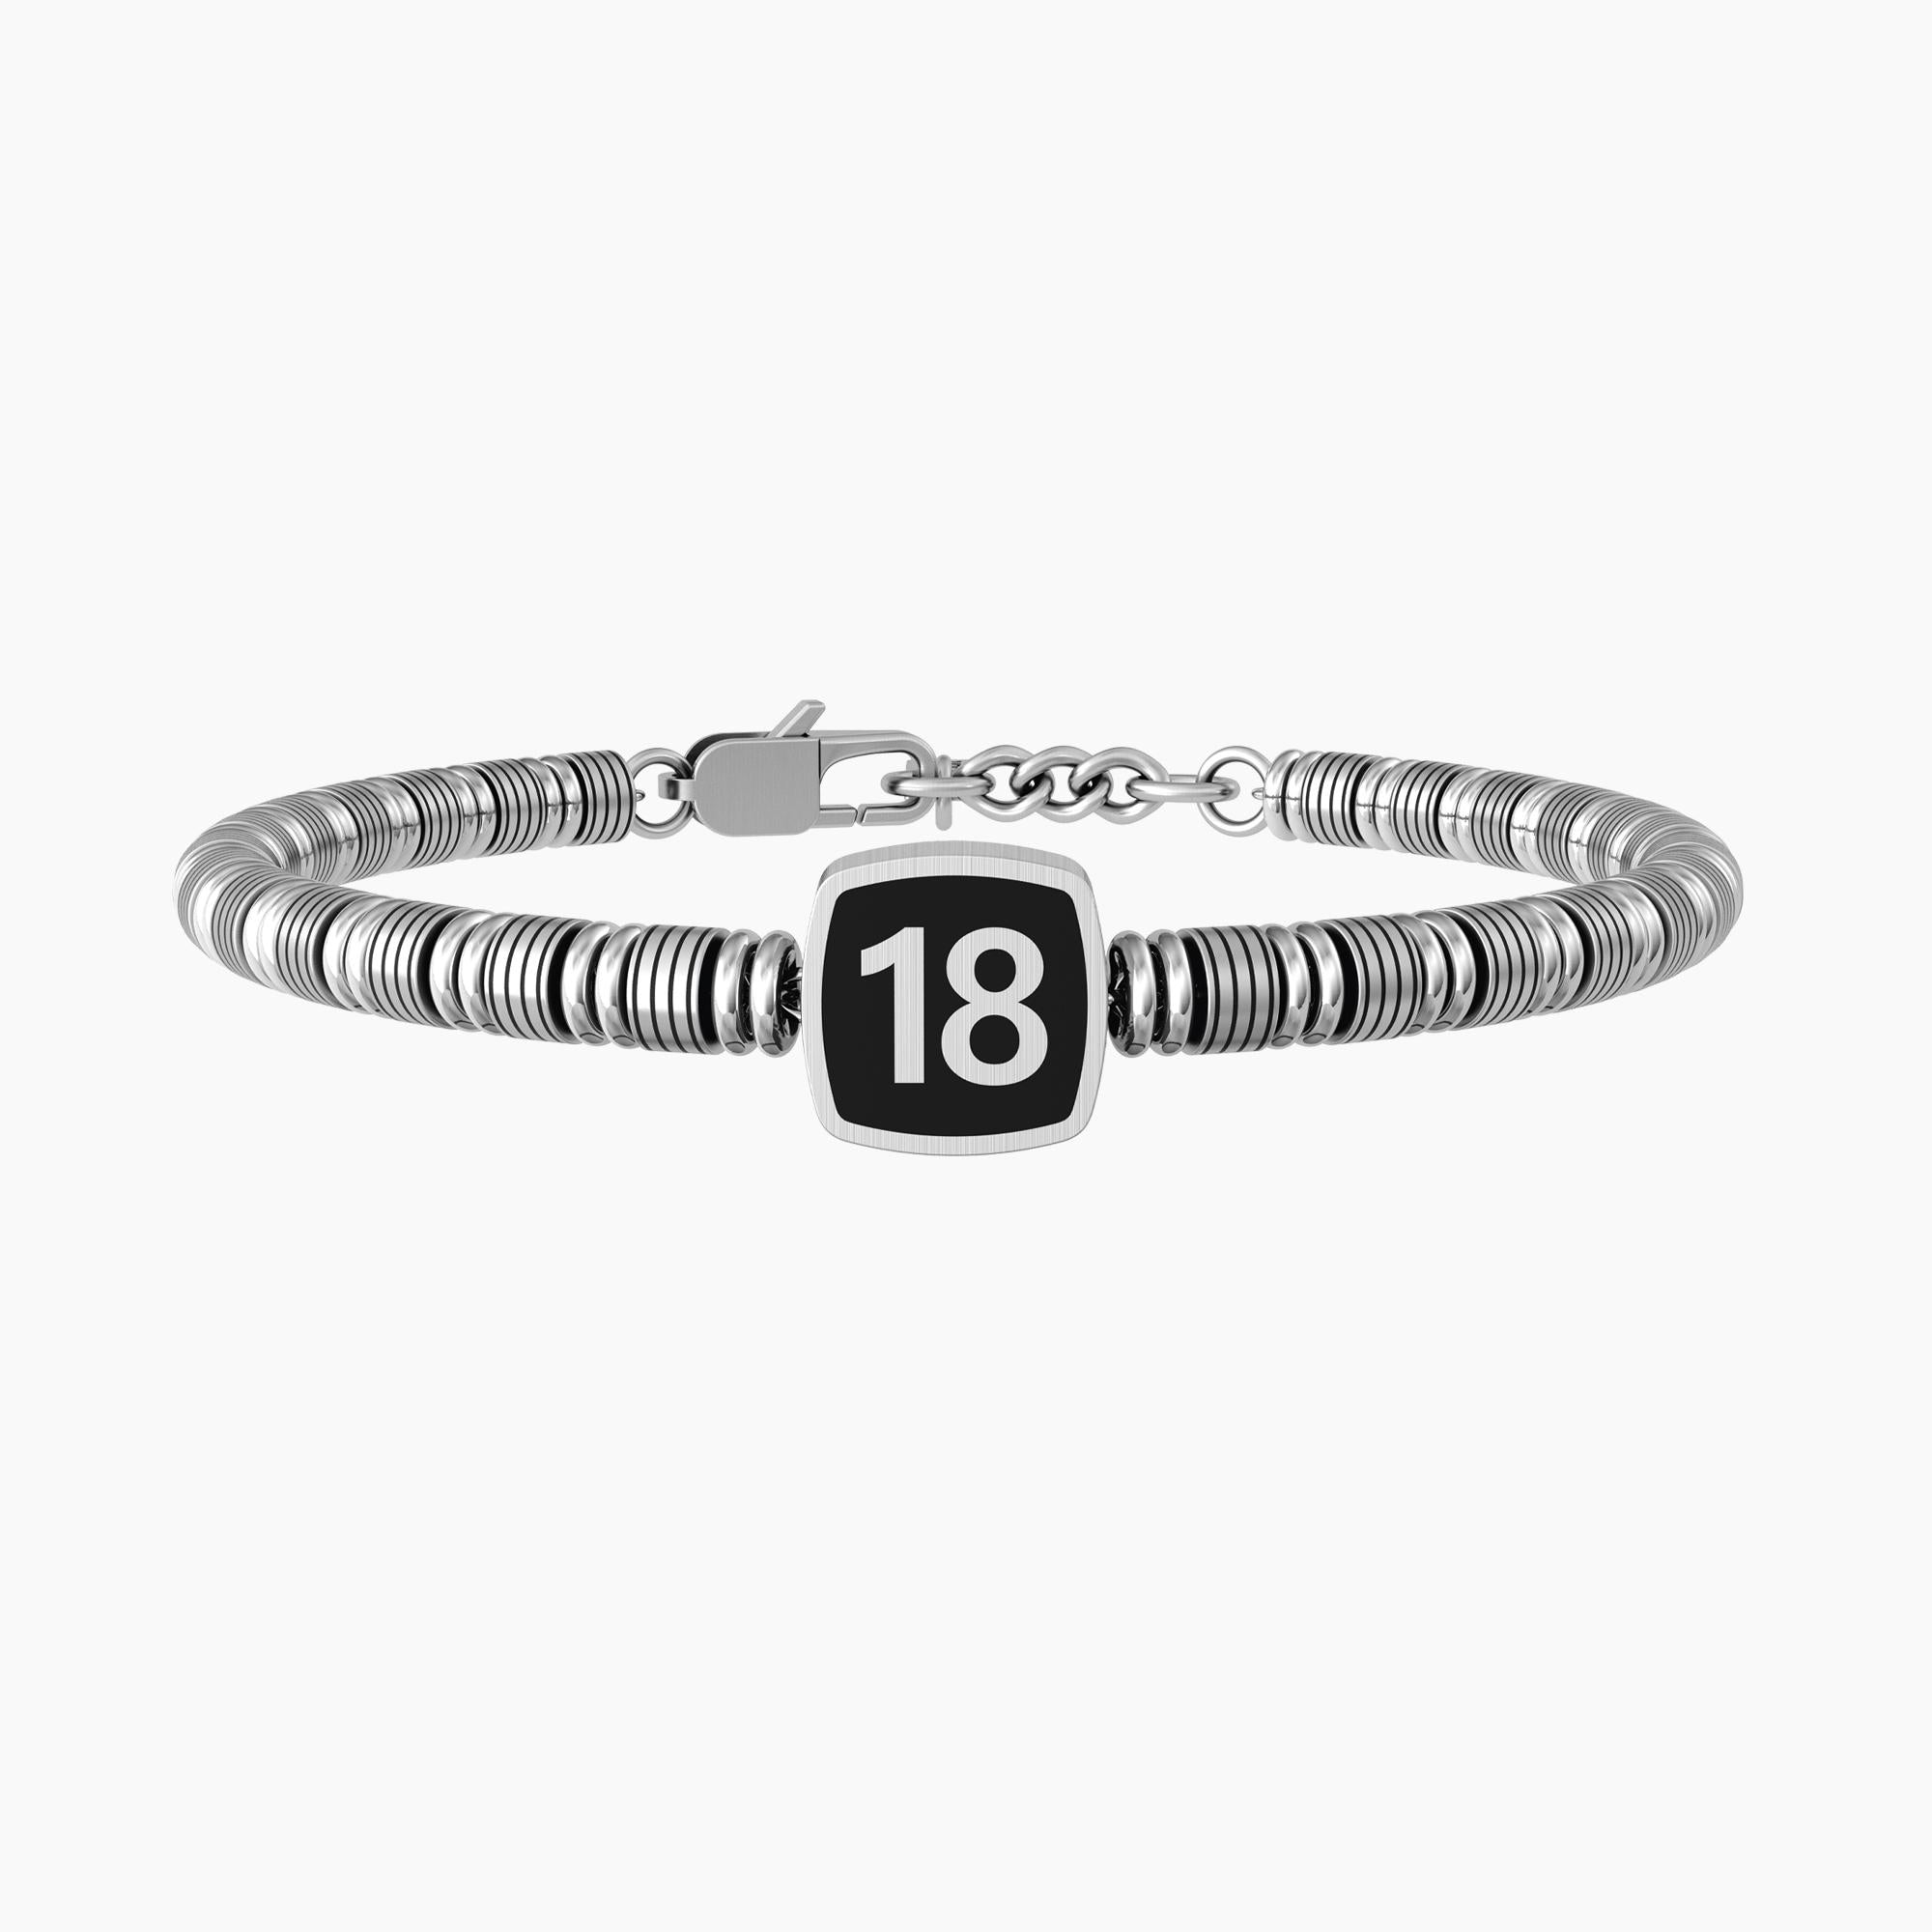 Bracciale Uomo collezione Special Moments - 18 | THE BEST IS YET TO COME - 732062